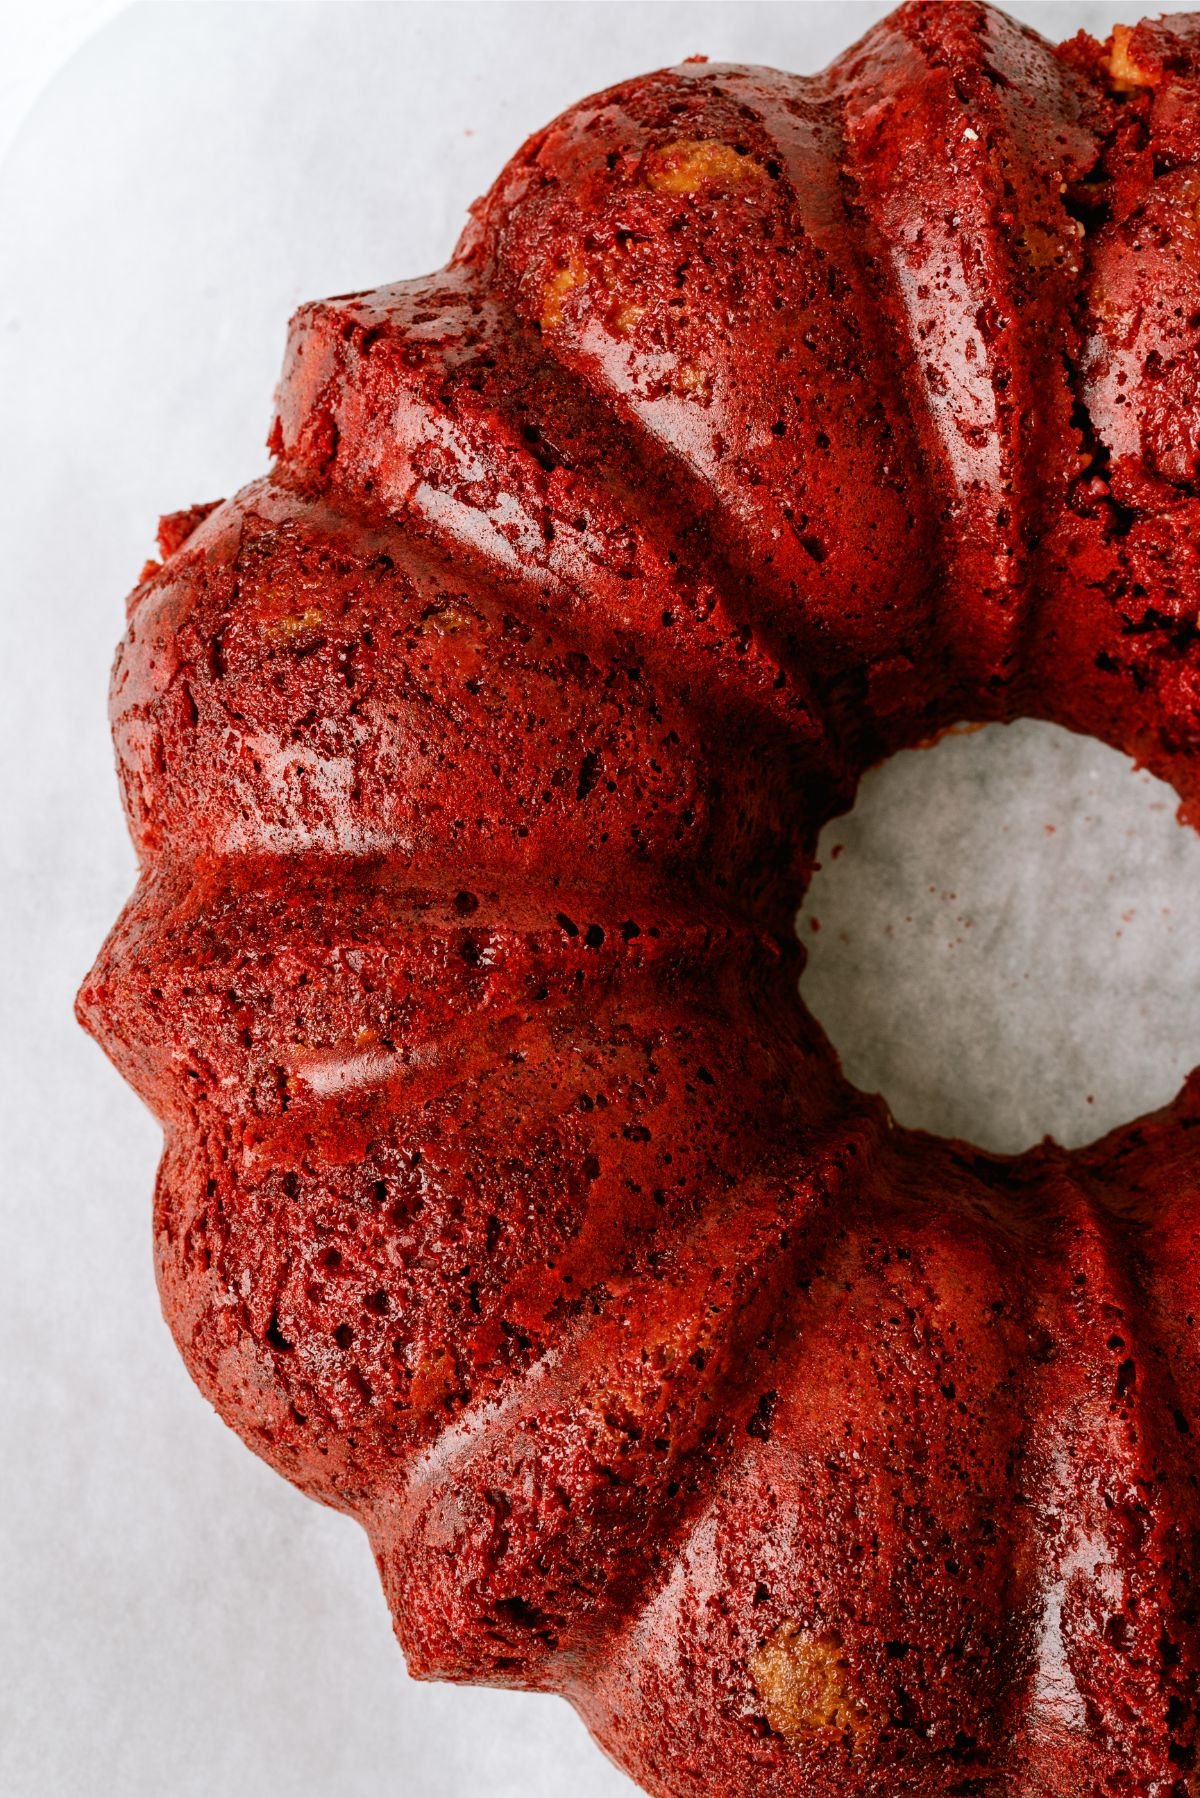 Top view of Red Velvet Bundt Cake without frosting